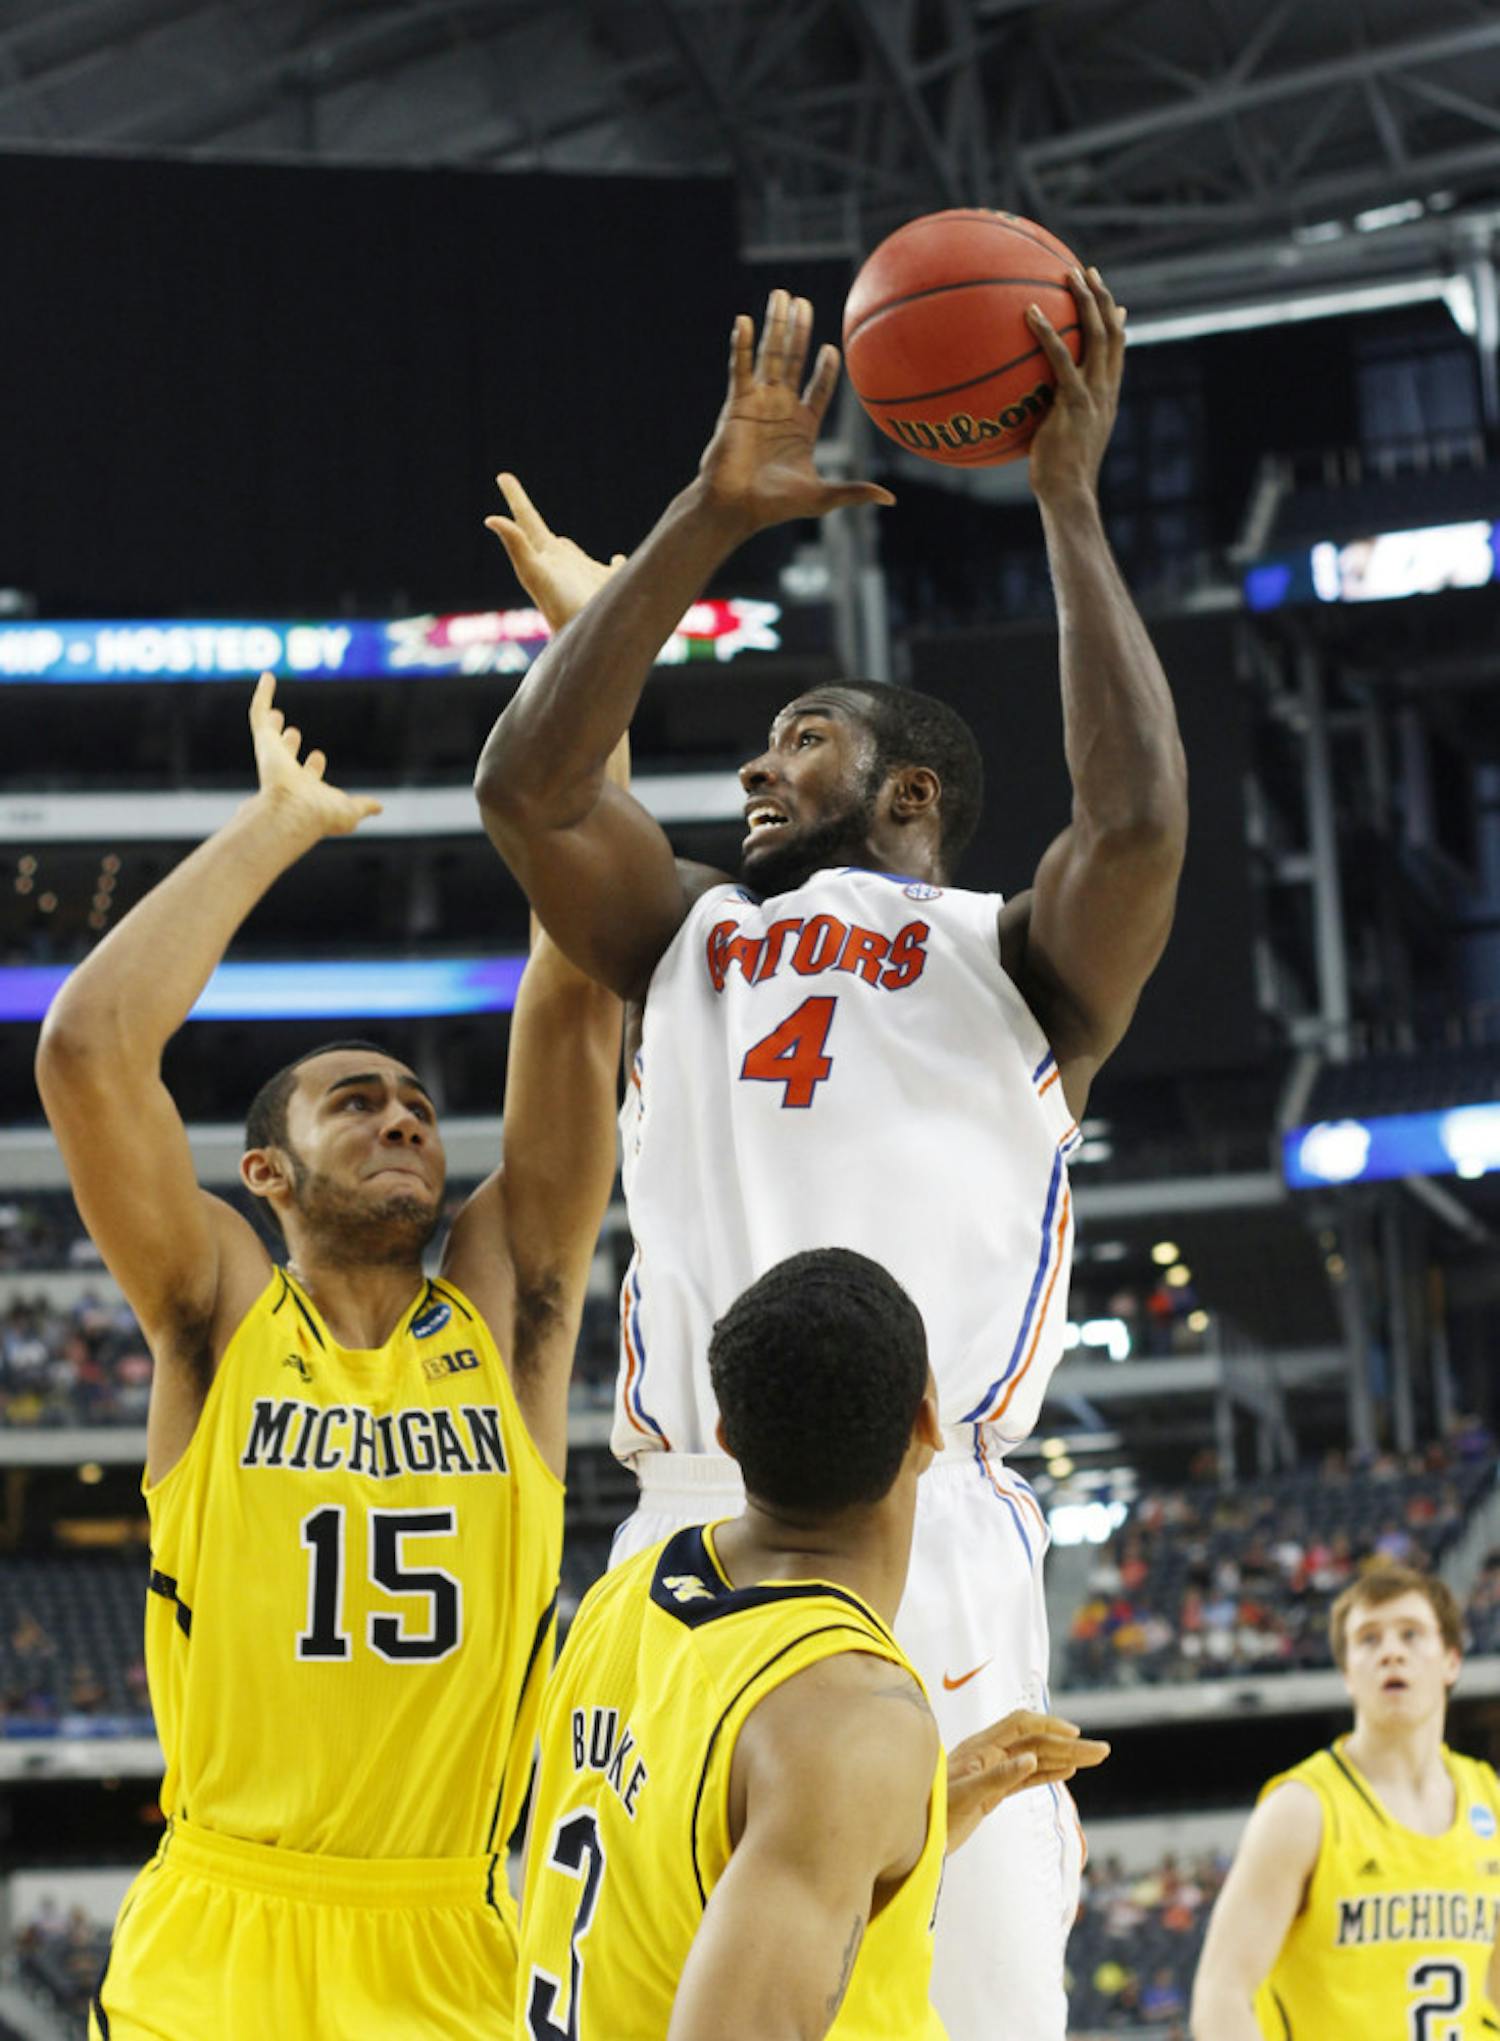 Junior center Patric Young (4) attempts a shot during Florida’s 79-59 loss to Michigan in the Elite Eight on Sunday at Cowboys Stadium in Arlington, Texas.